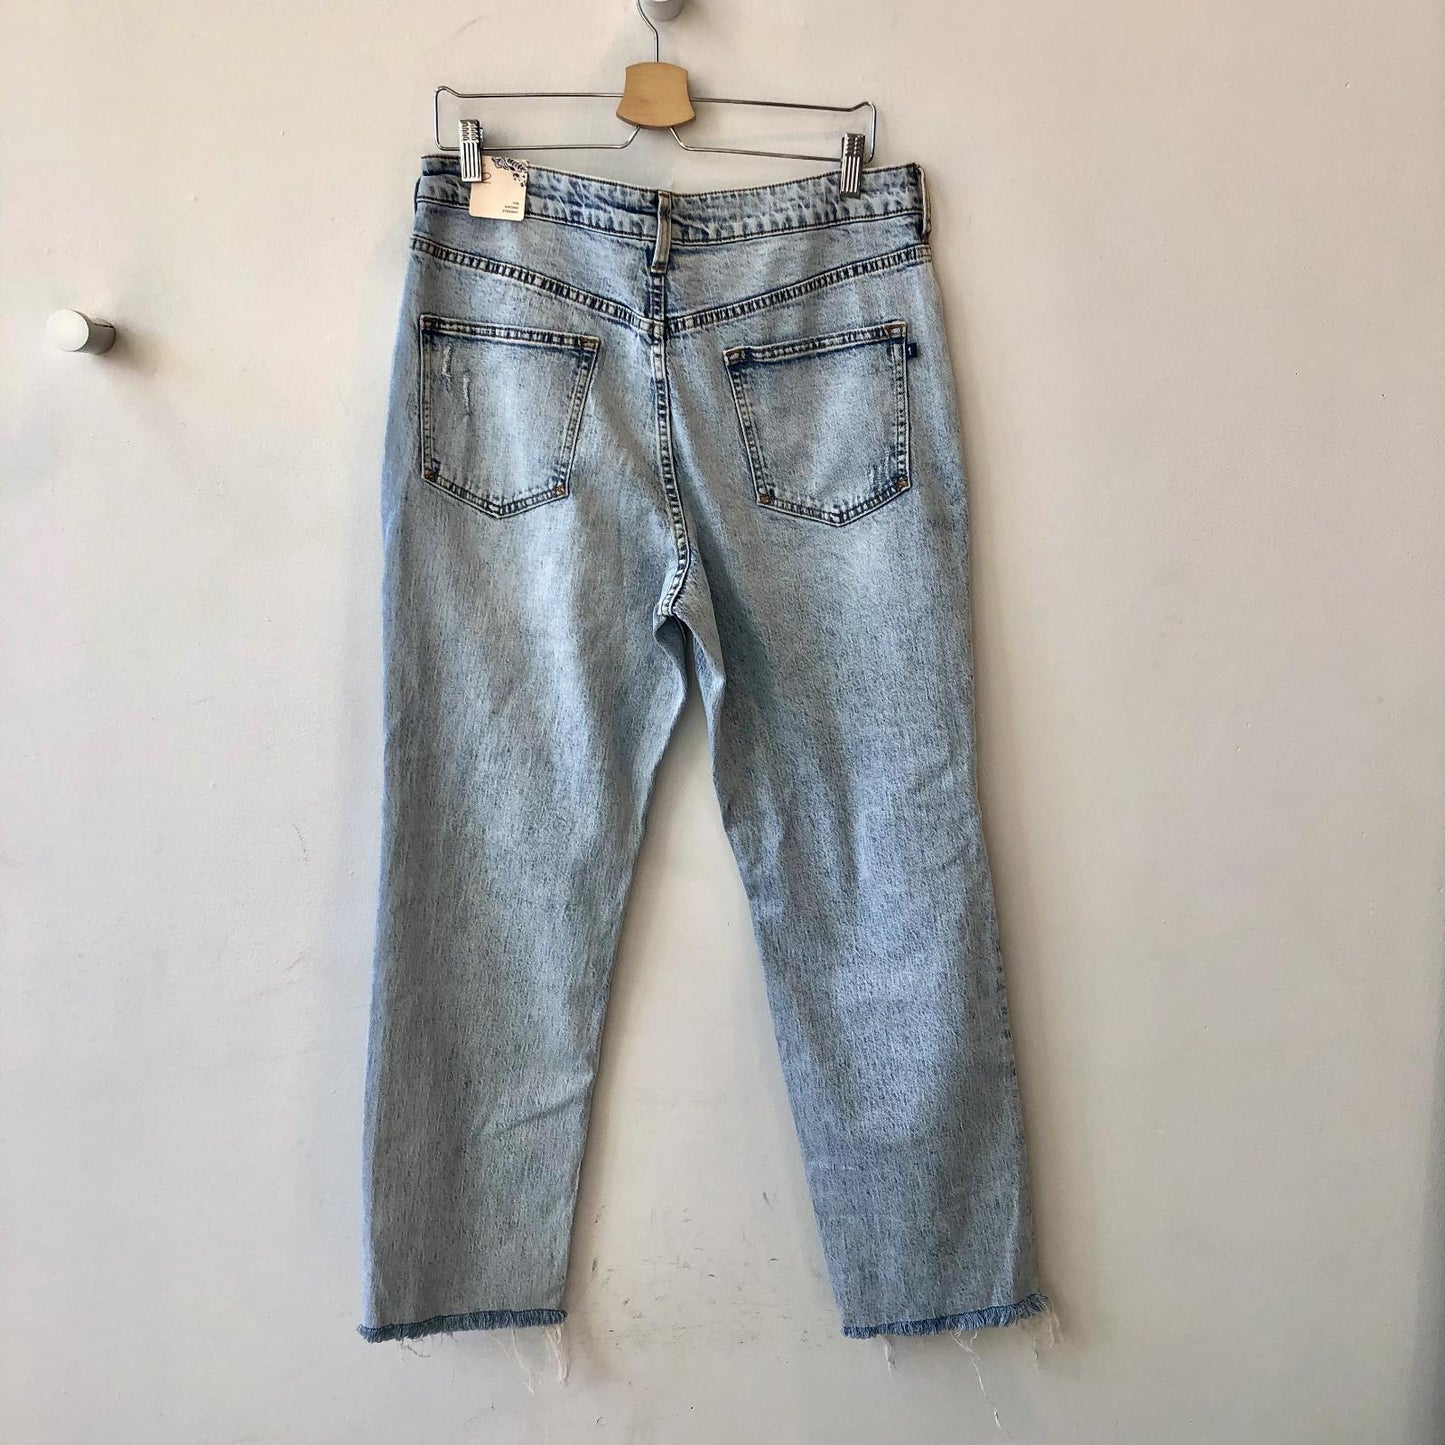 32 - Pilcro Anthropologie NEW $160 Distressed Vintage Straight Leg Jeans 0131AW